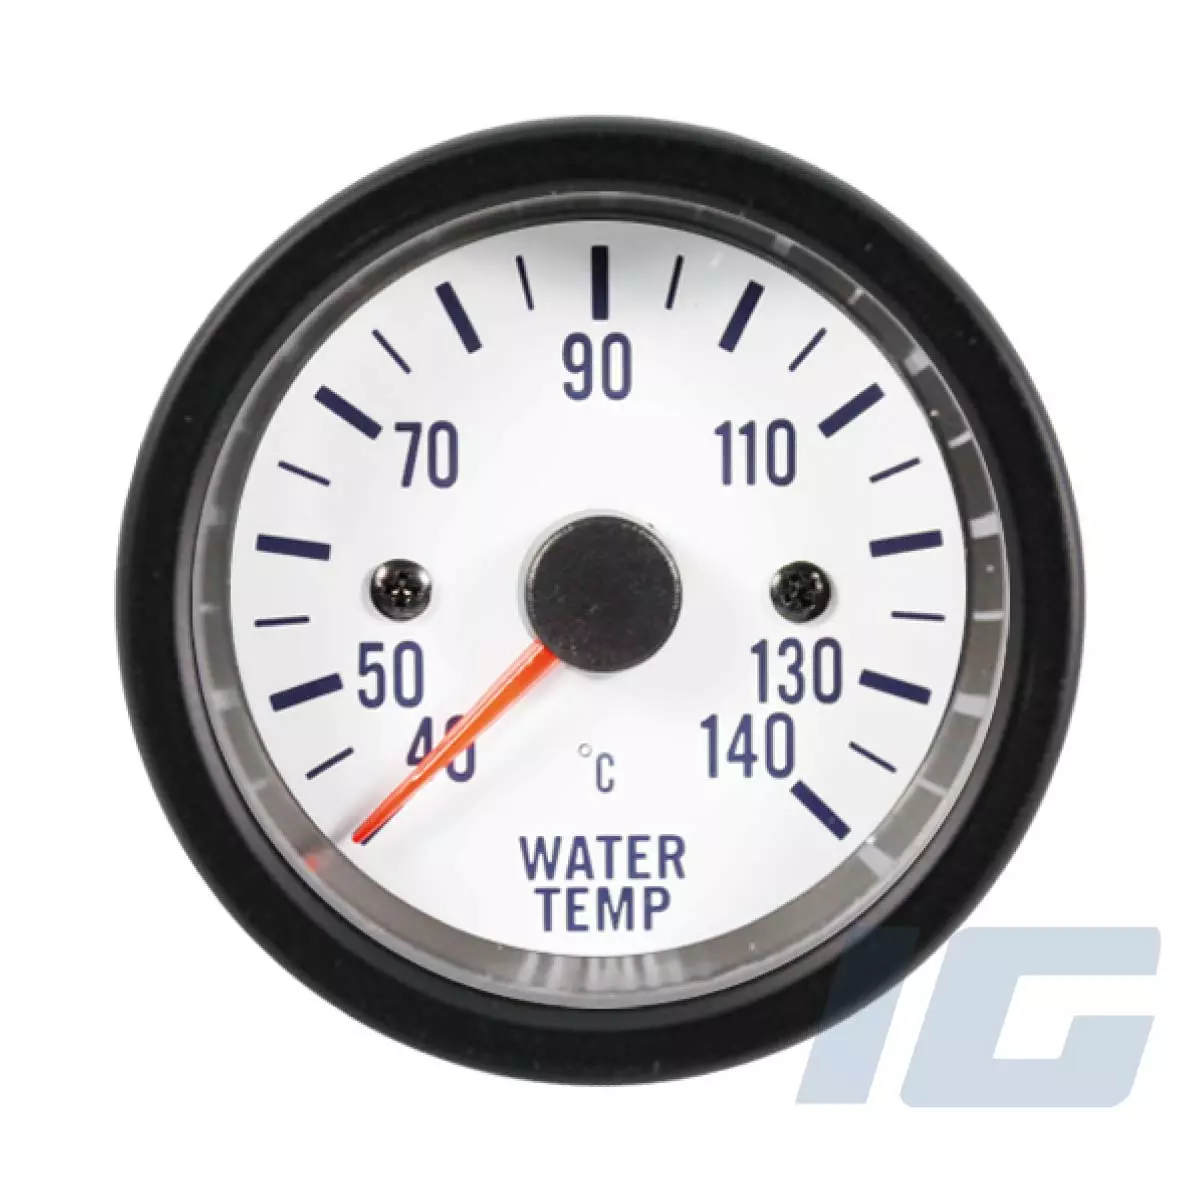 igauge, AFTERMARKET THERMOMETER COOLANT WATER TEMPERATURE GAUGE FOR CARS WITH TEMP PROBE SENSOR KIT